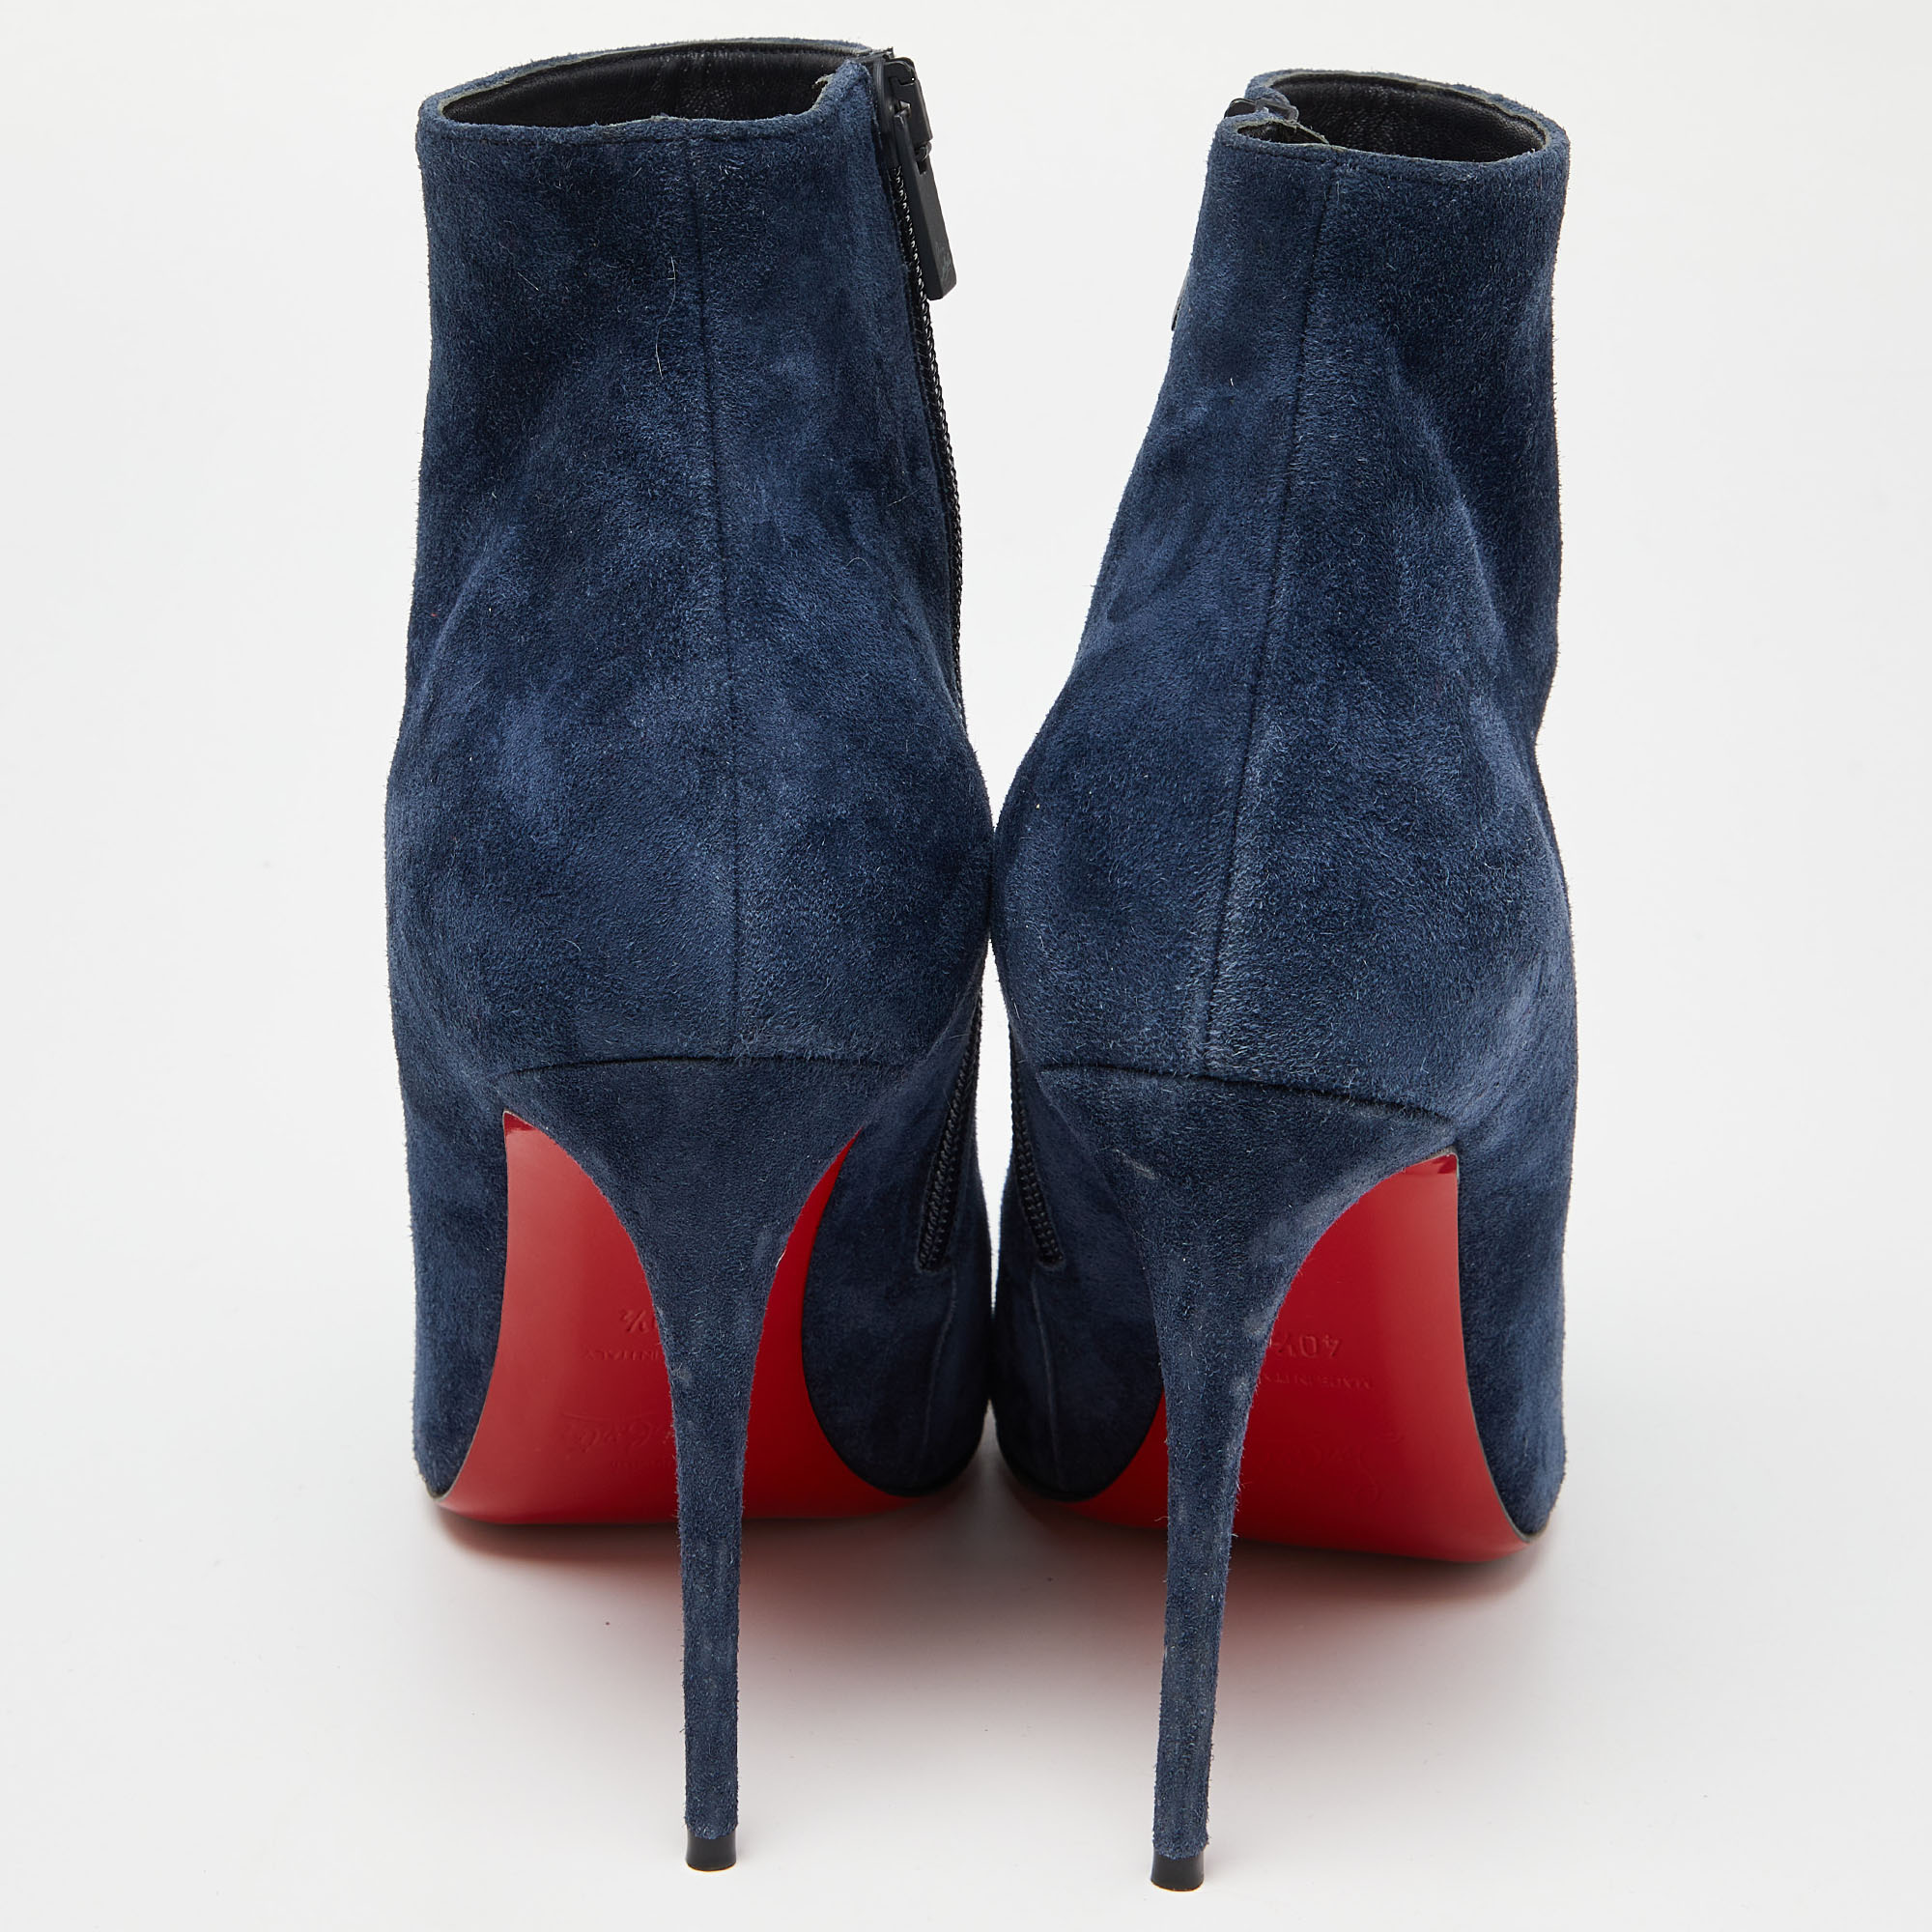 Christian Louboutin Blue Suede Eloise 85 Boots Size 40.5